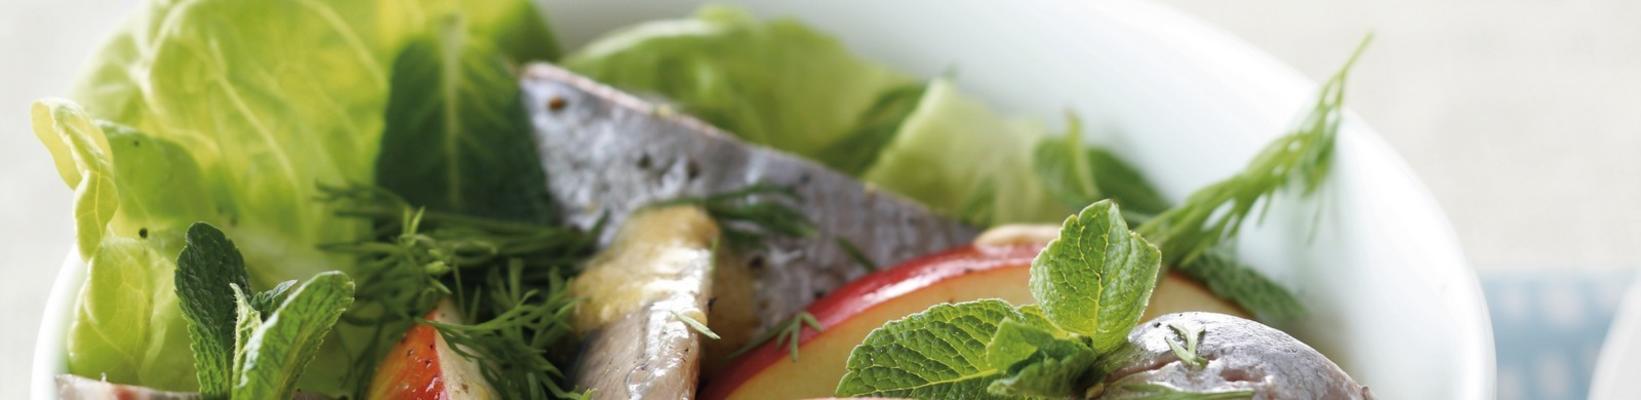 herring salad with apple, mint and mustard dressing